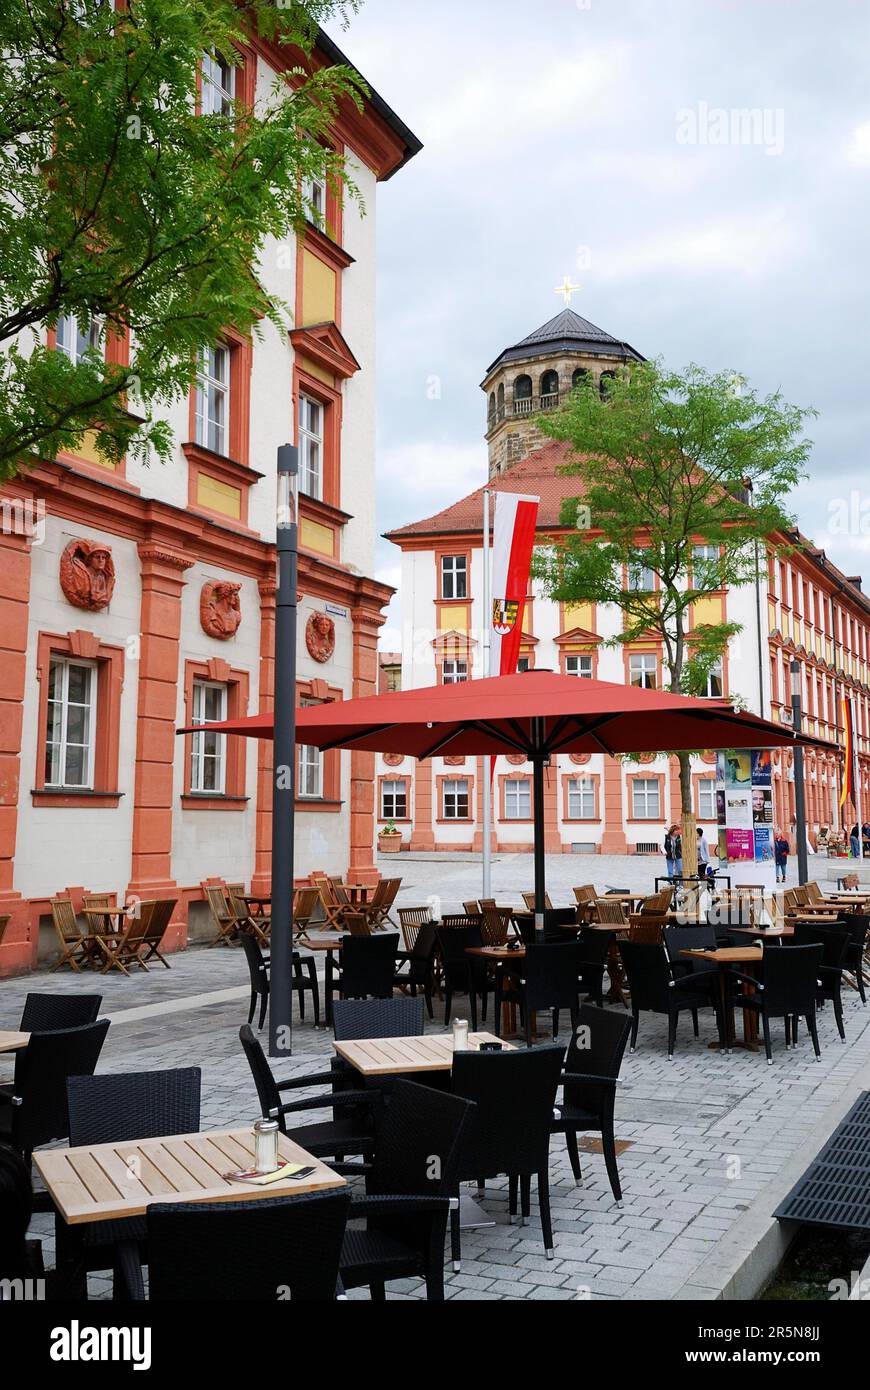 BAYREUTH, GERMANY, JUNE 25: Street cafe in the Maximilian street of Bayreuth on June 25, 2011. View towards the tower of the old castle (Altes Stock Photo